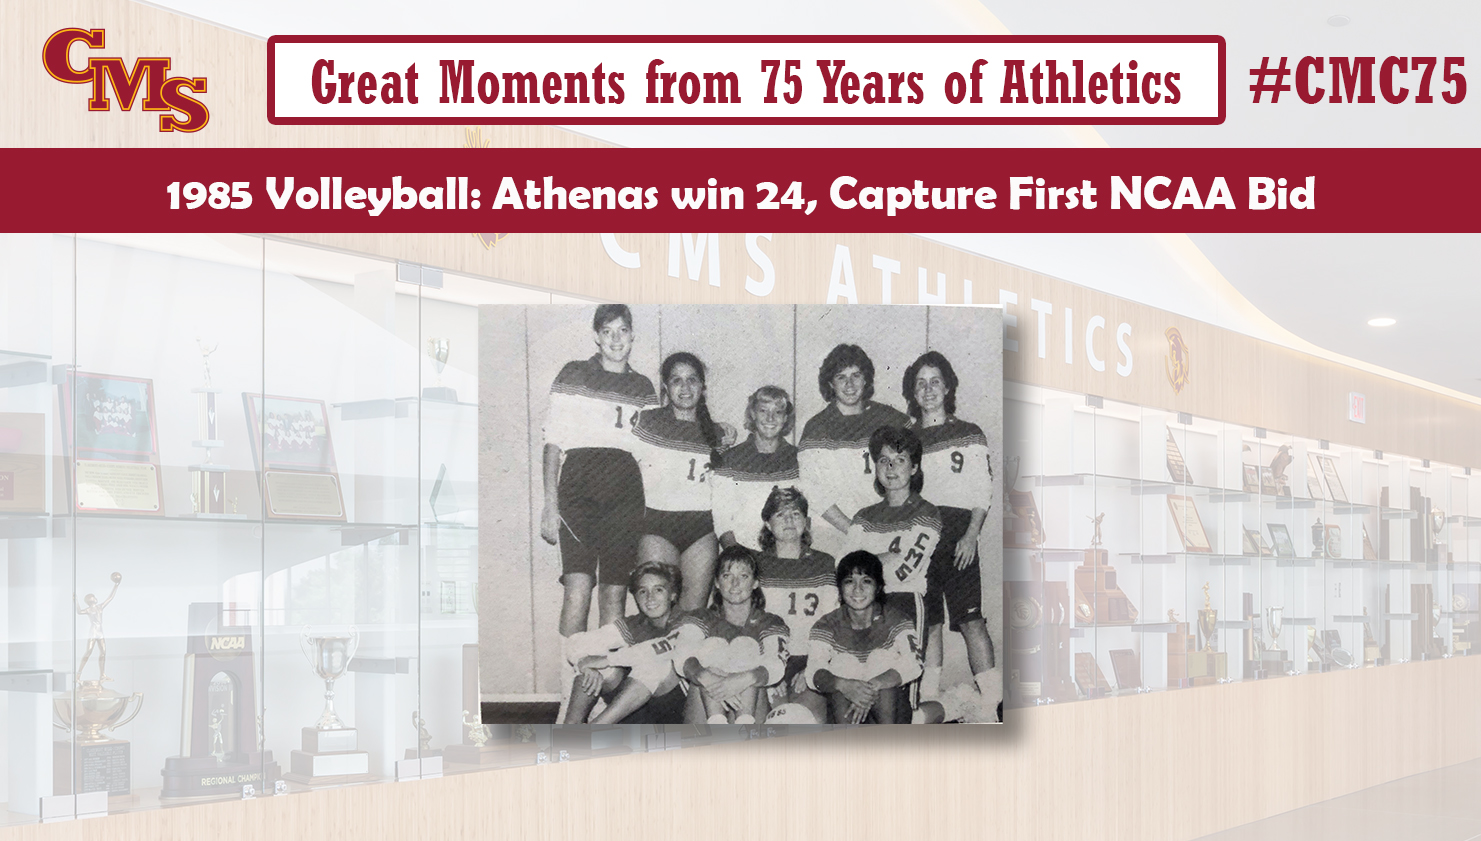 A team photo of the 1985 CMS volleyball team. Words over the photo read: Great Moments from 75 Years of Athletics, 1985 Volleyball: Athenas win 24, Capture First NCAA Bid